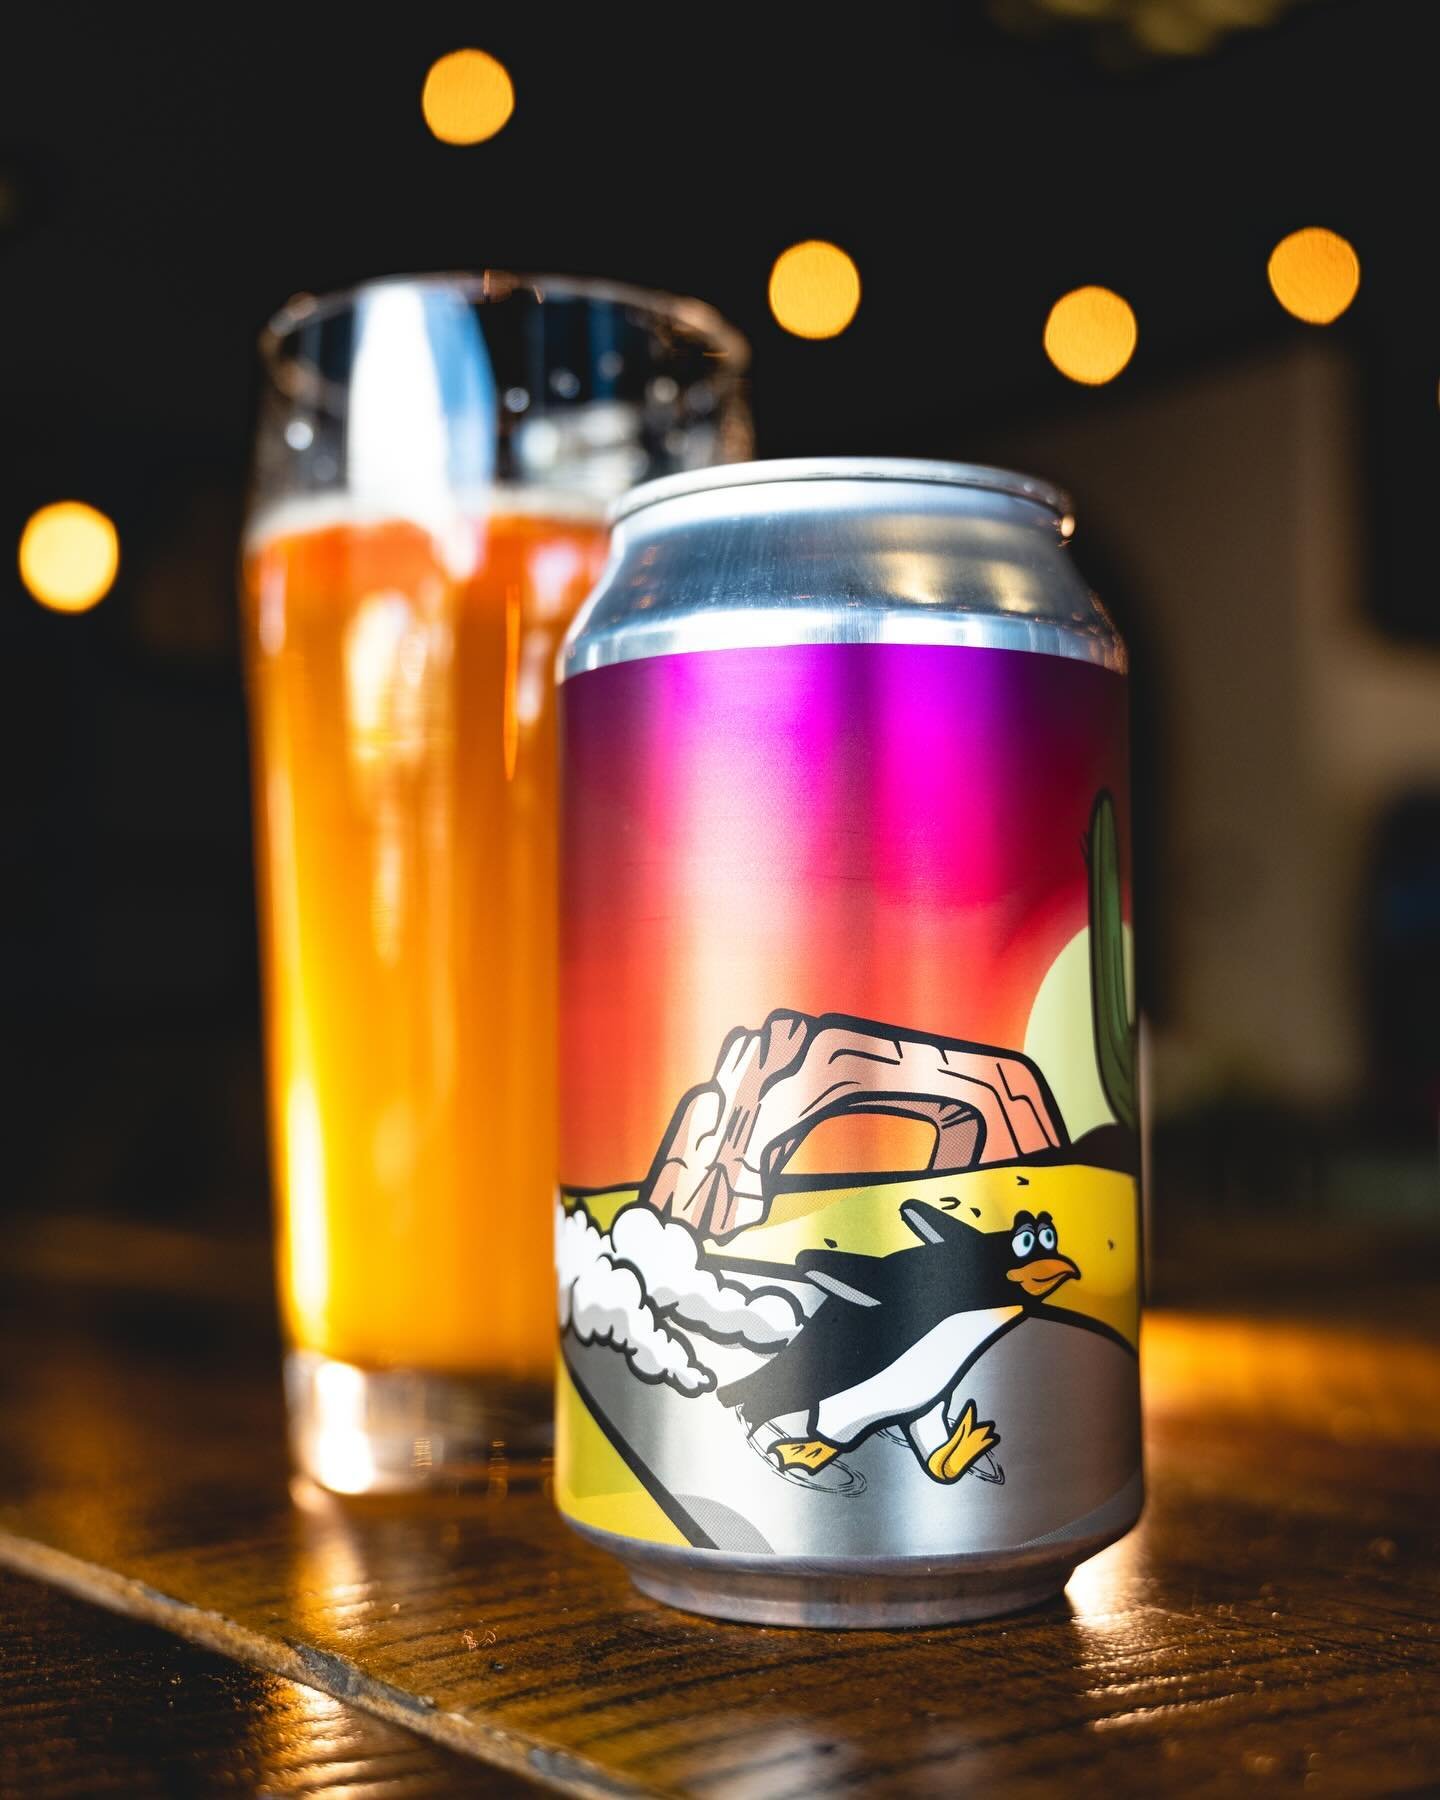 Post-run vibes with the Birdfish Run Club. Join the club, run a couple miles through the park, and cooldown with a refreshing Mexican lager! Wednesday beer specials for run club members only 🍻🐧 #speedyping&uuml;ino